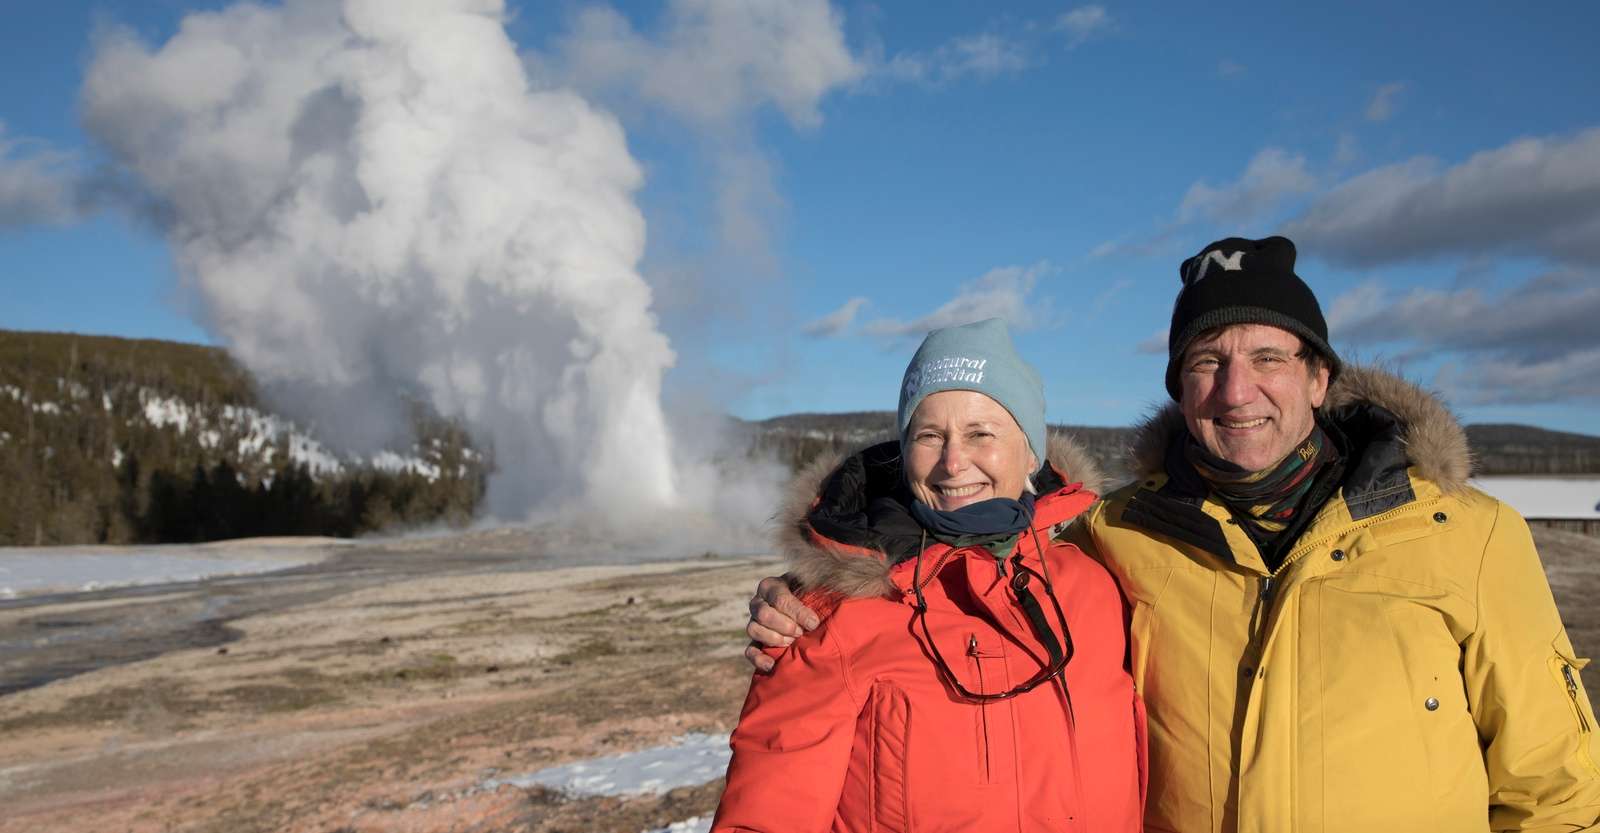 Nat Hab guests and geyser, Yellowstone National Park, Wyoming.